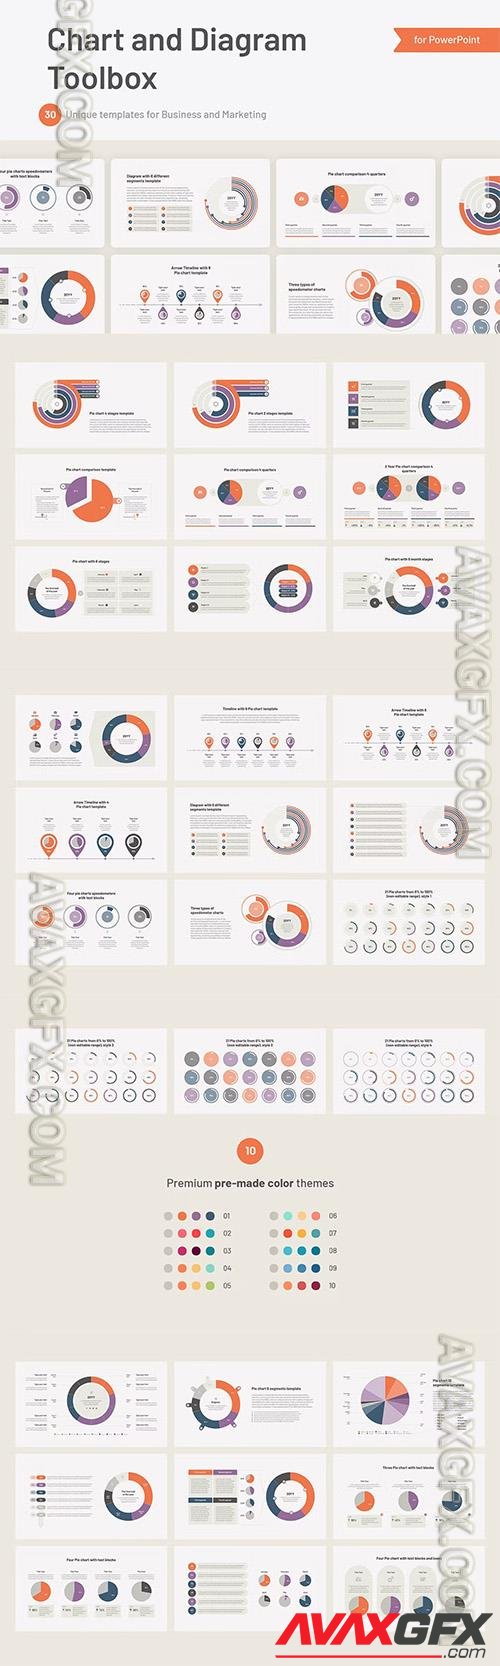 Chart and Diagram PowerPoint and Keynote Toolbox